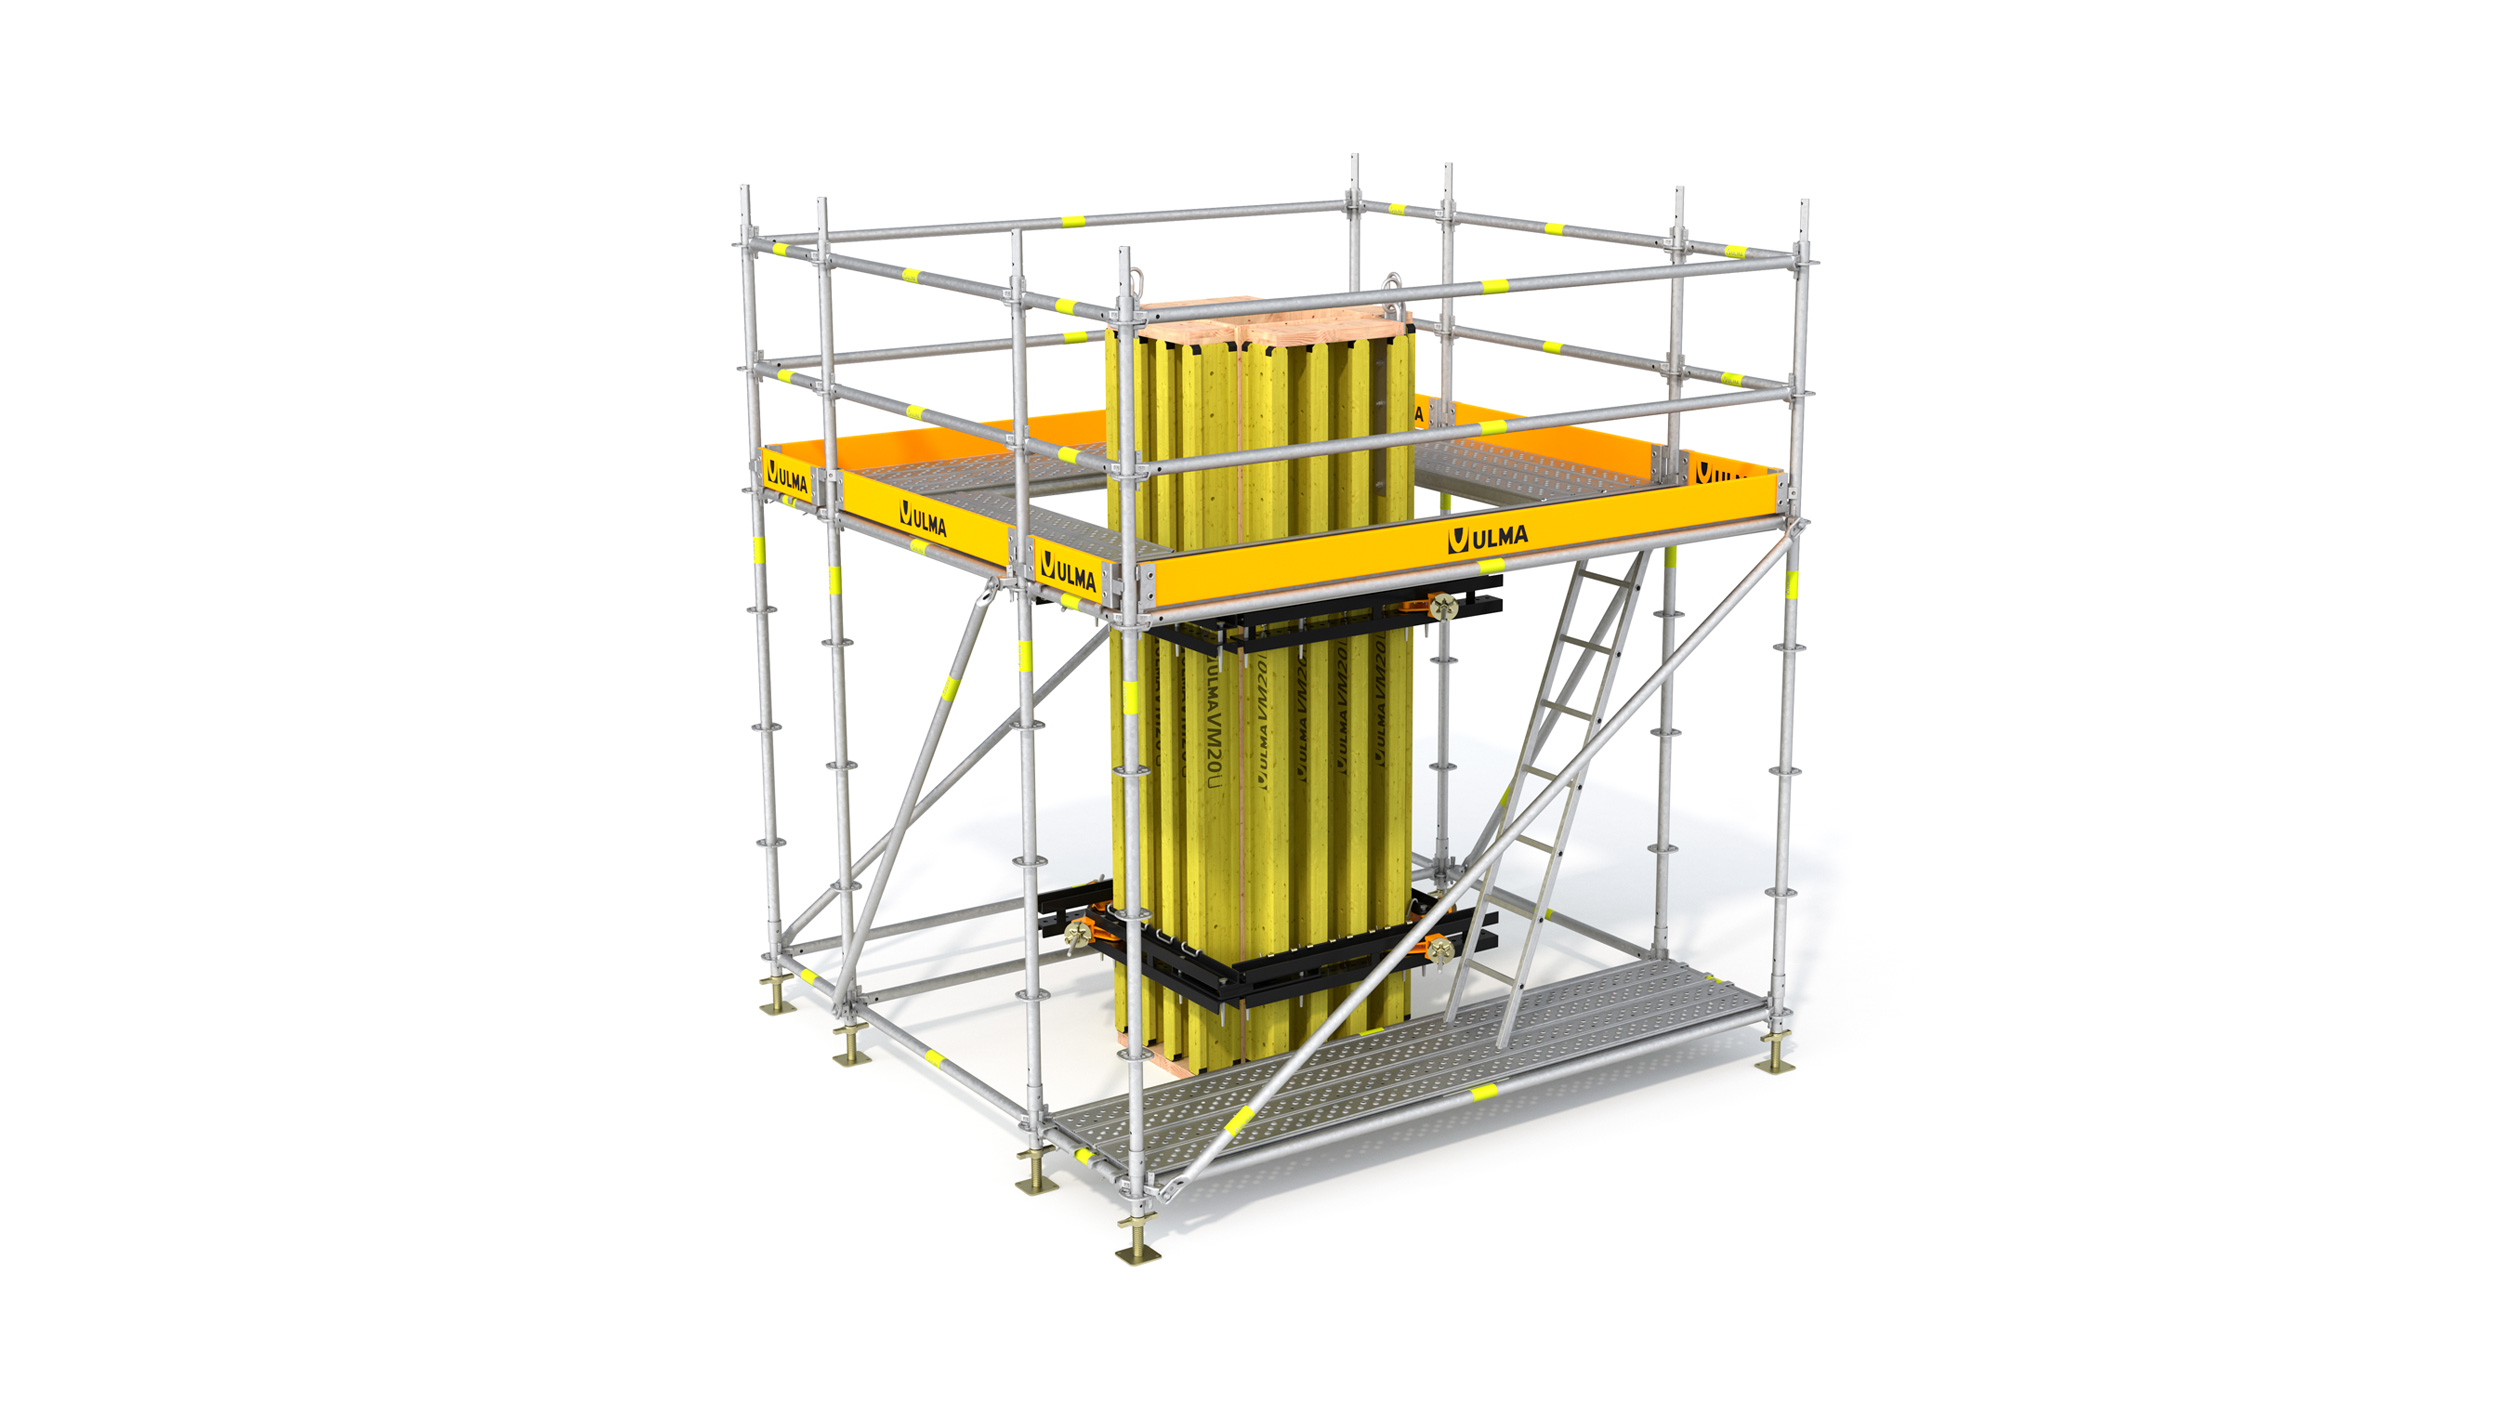 Working towers that allow access for operators and material at different points of the structure under construction. Multiple configurations are possible.